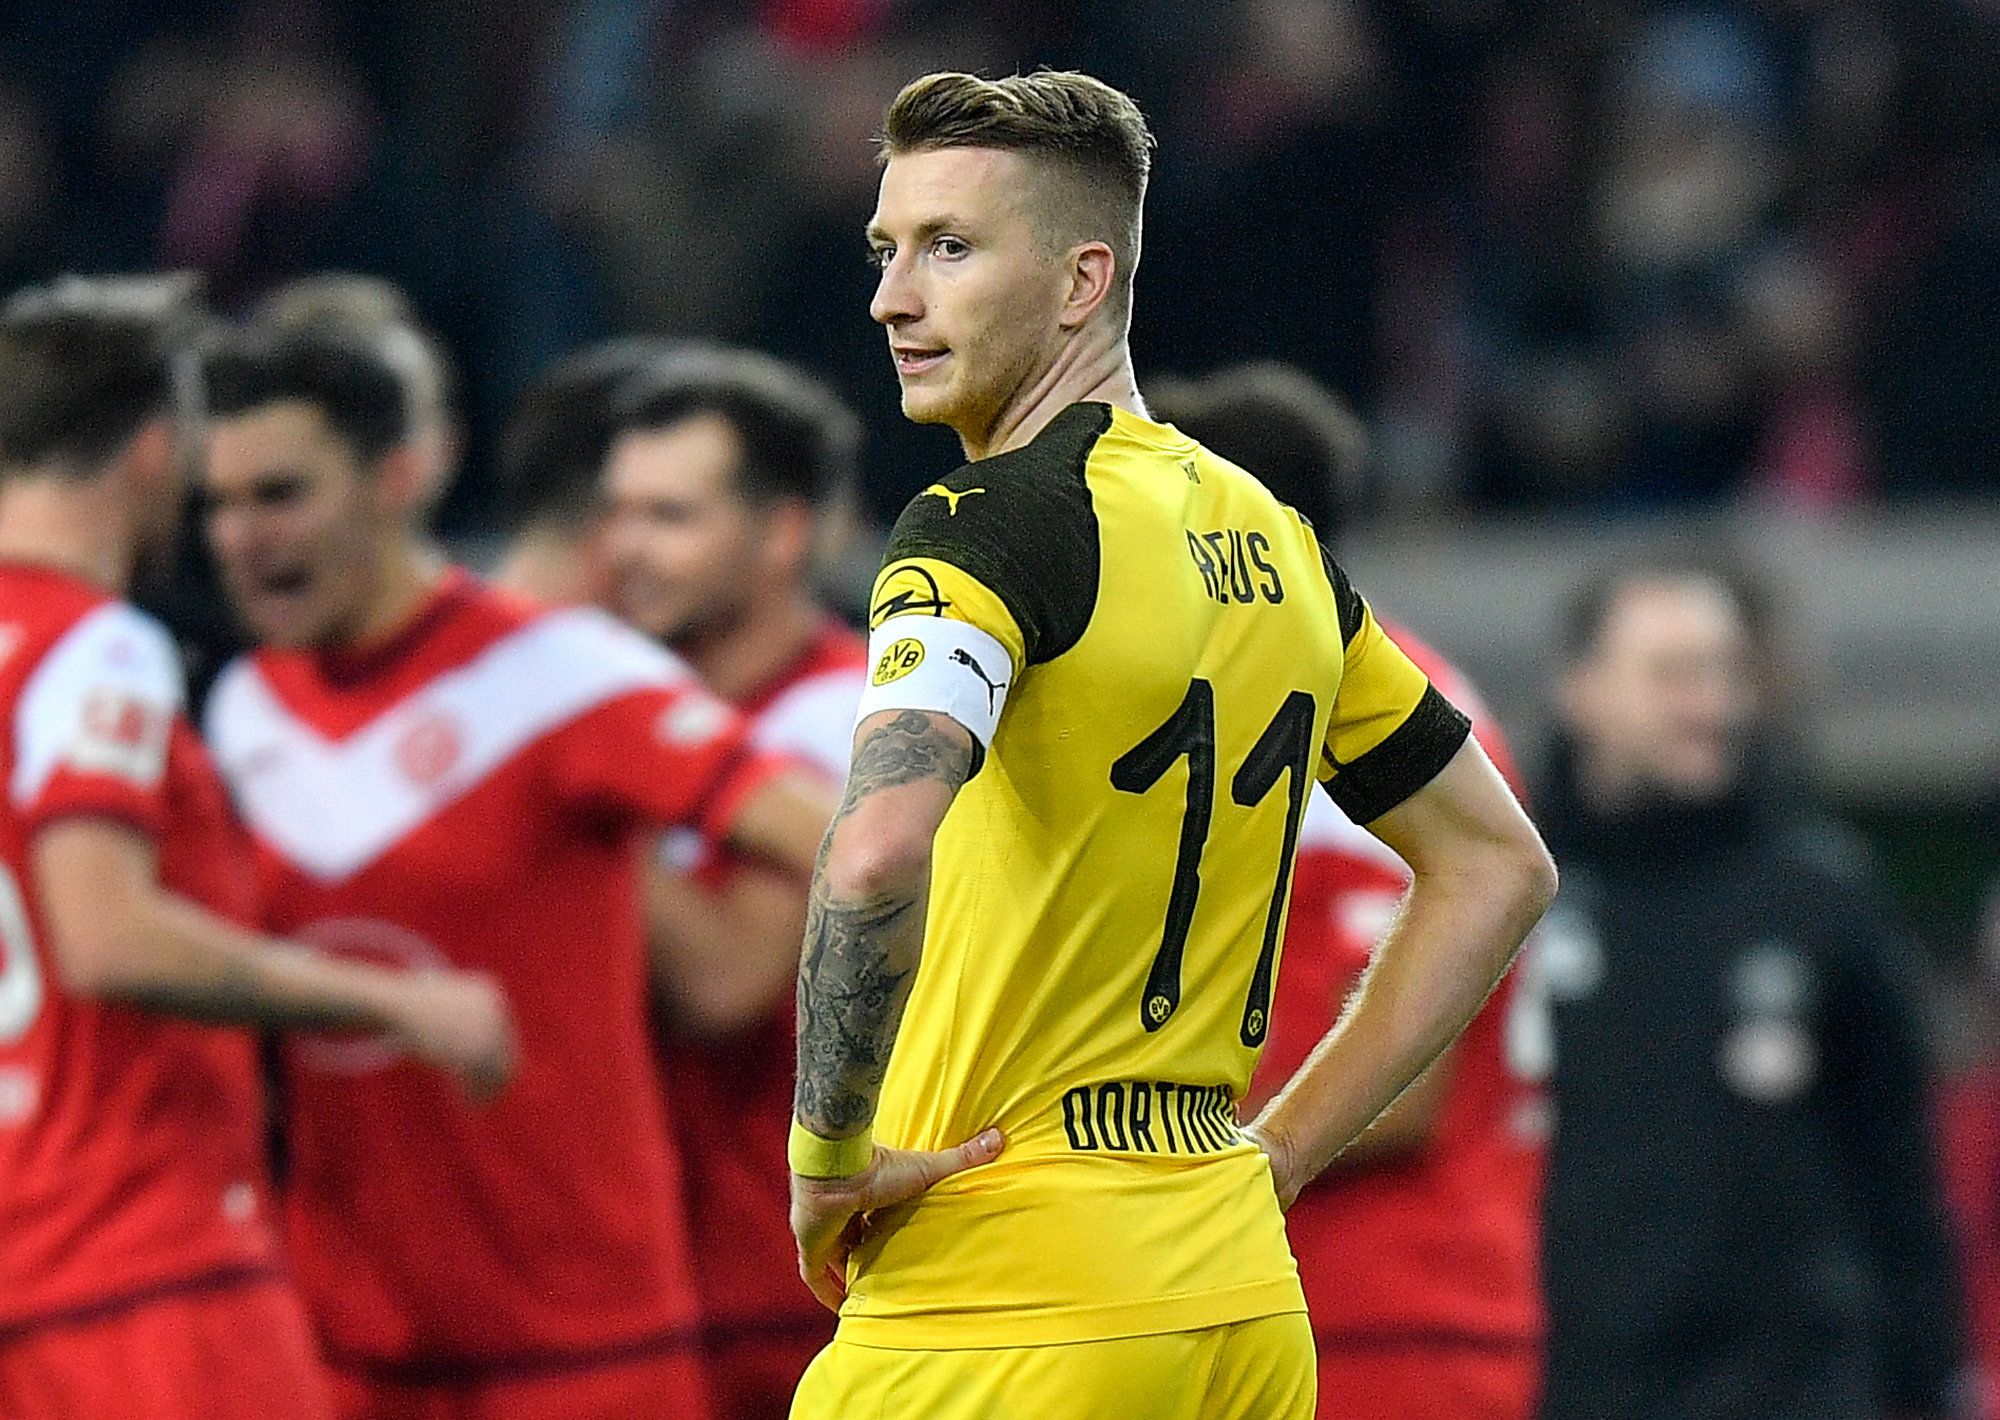 Marco Reus Has Been Kicked Hard by Soccer. He's Still Standing